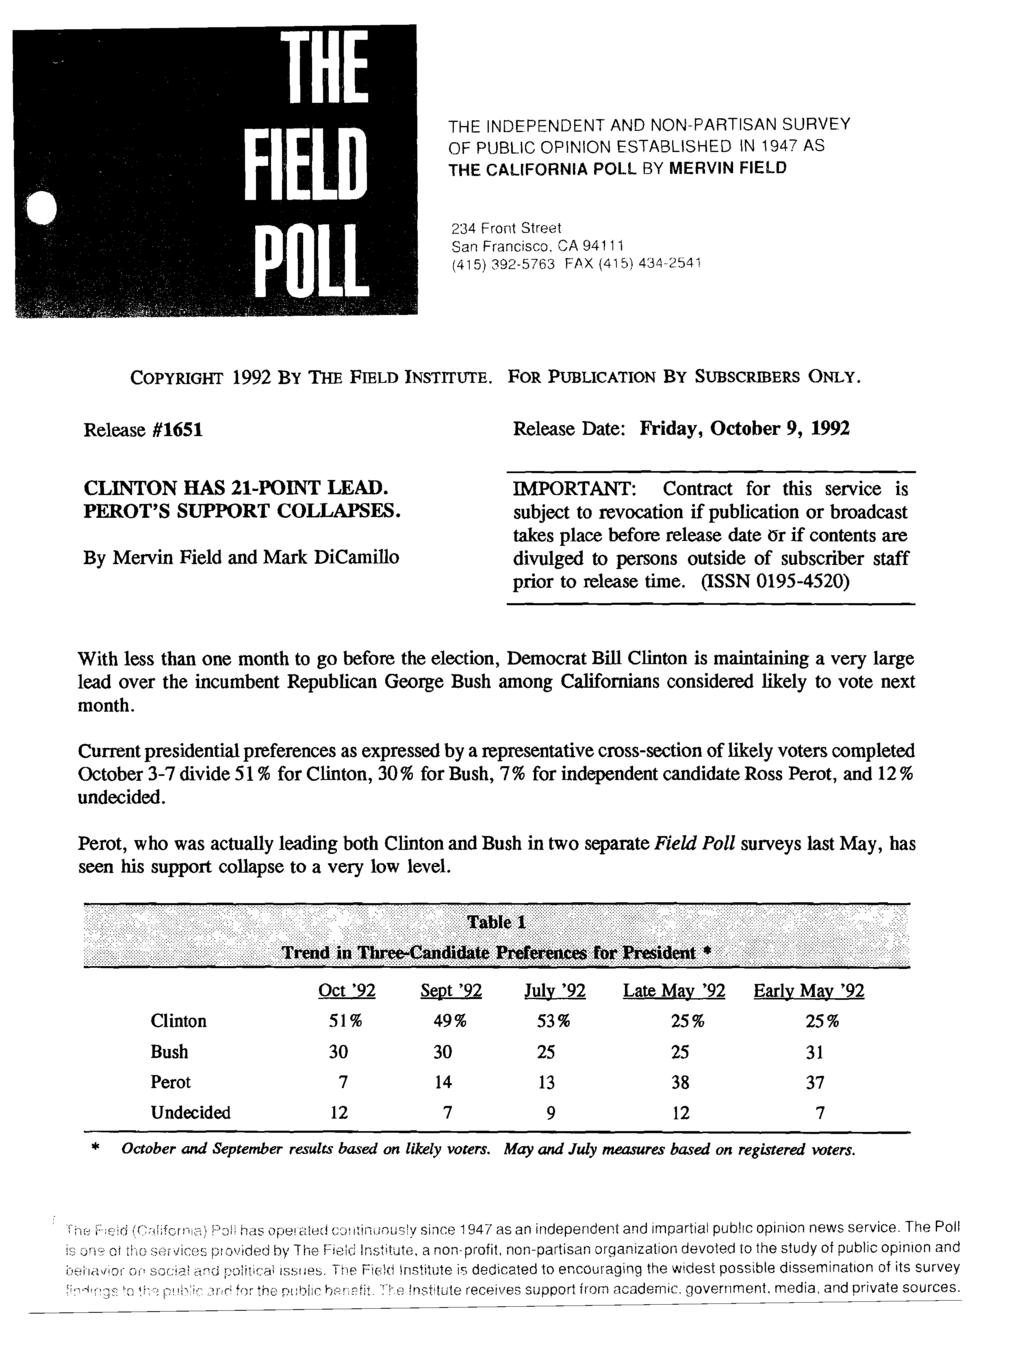 THE INDEPENDENT AND NON-PARTISAN SURVEY OF PUBLIC OPINION ESTABLISHED IN 1947 AS THE CALIFORNIA POLL BY MERVIN FIELD 234 Front Street San Francisco.